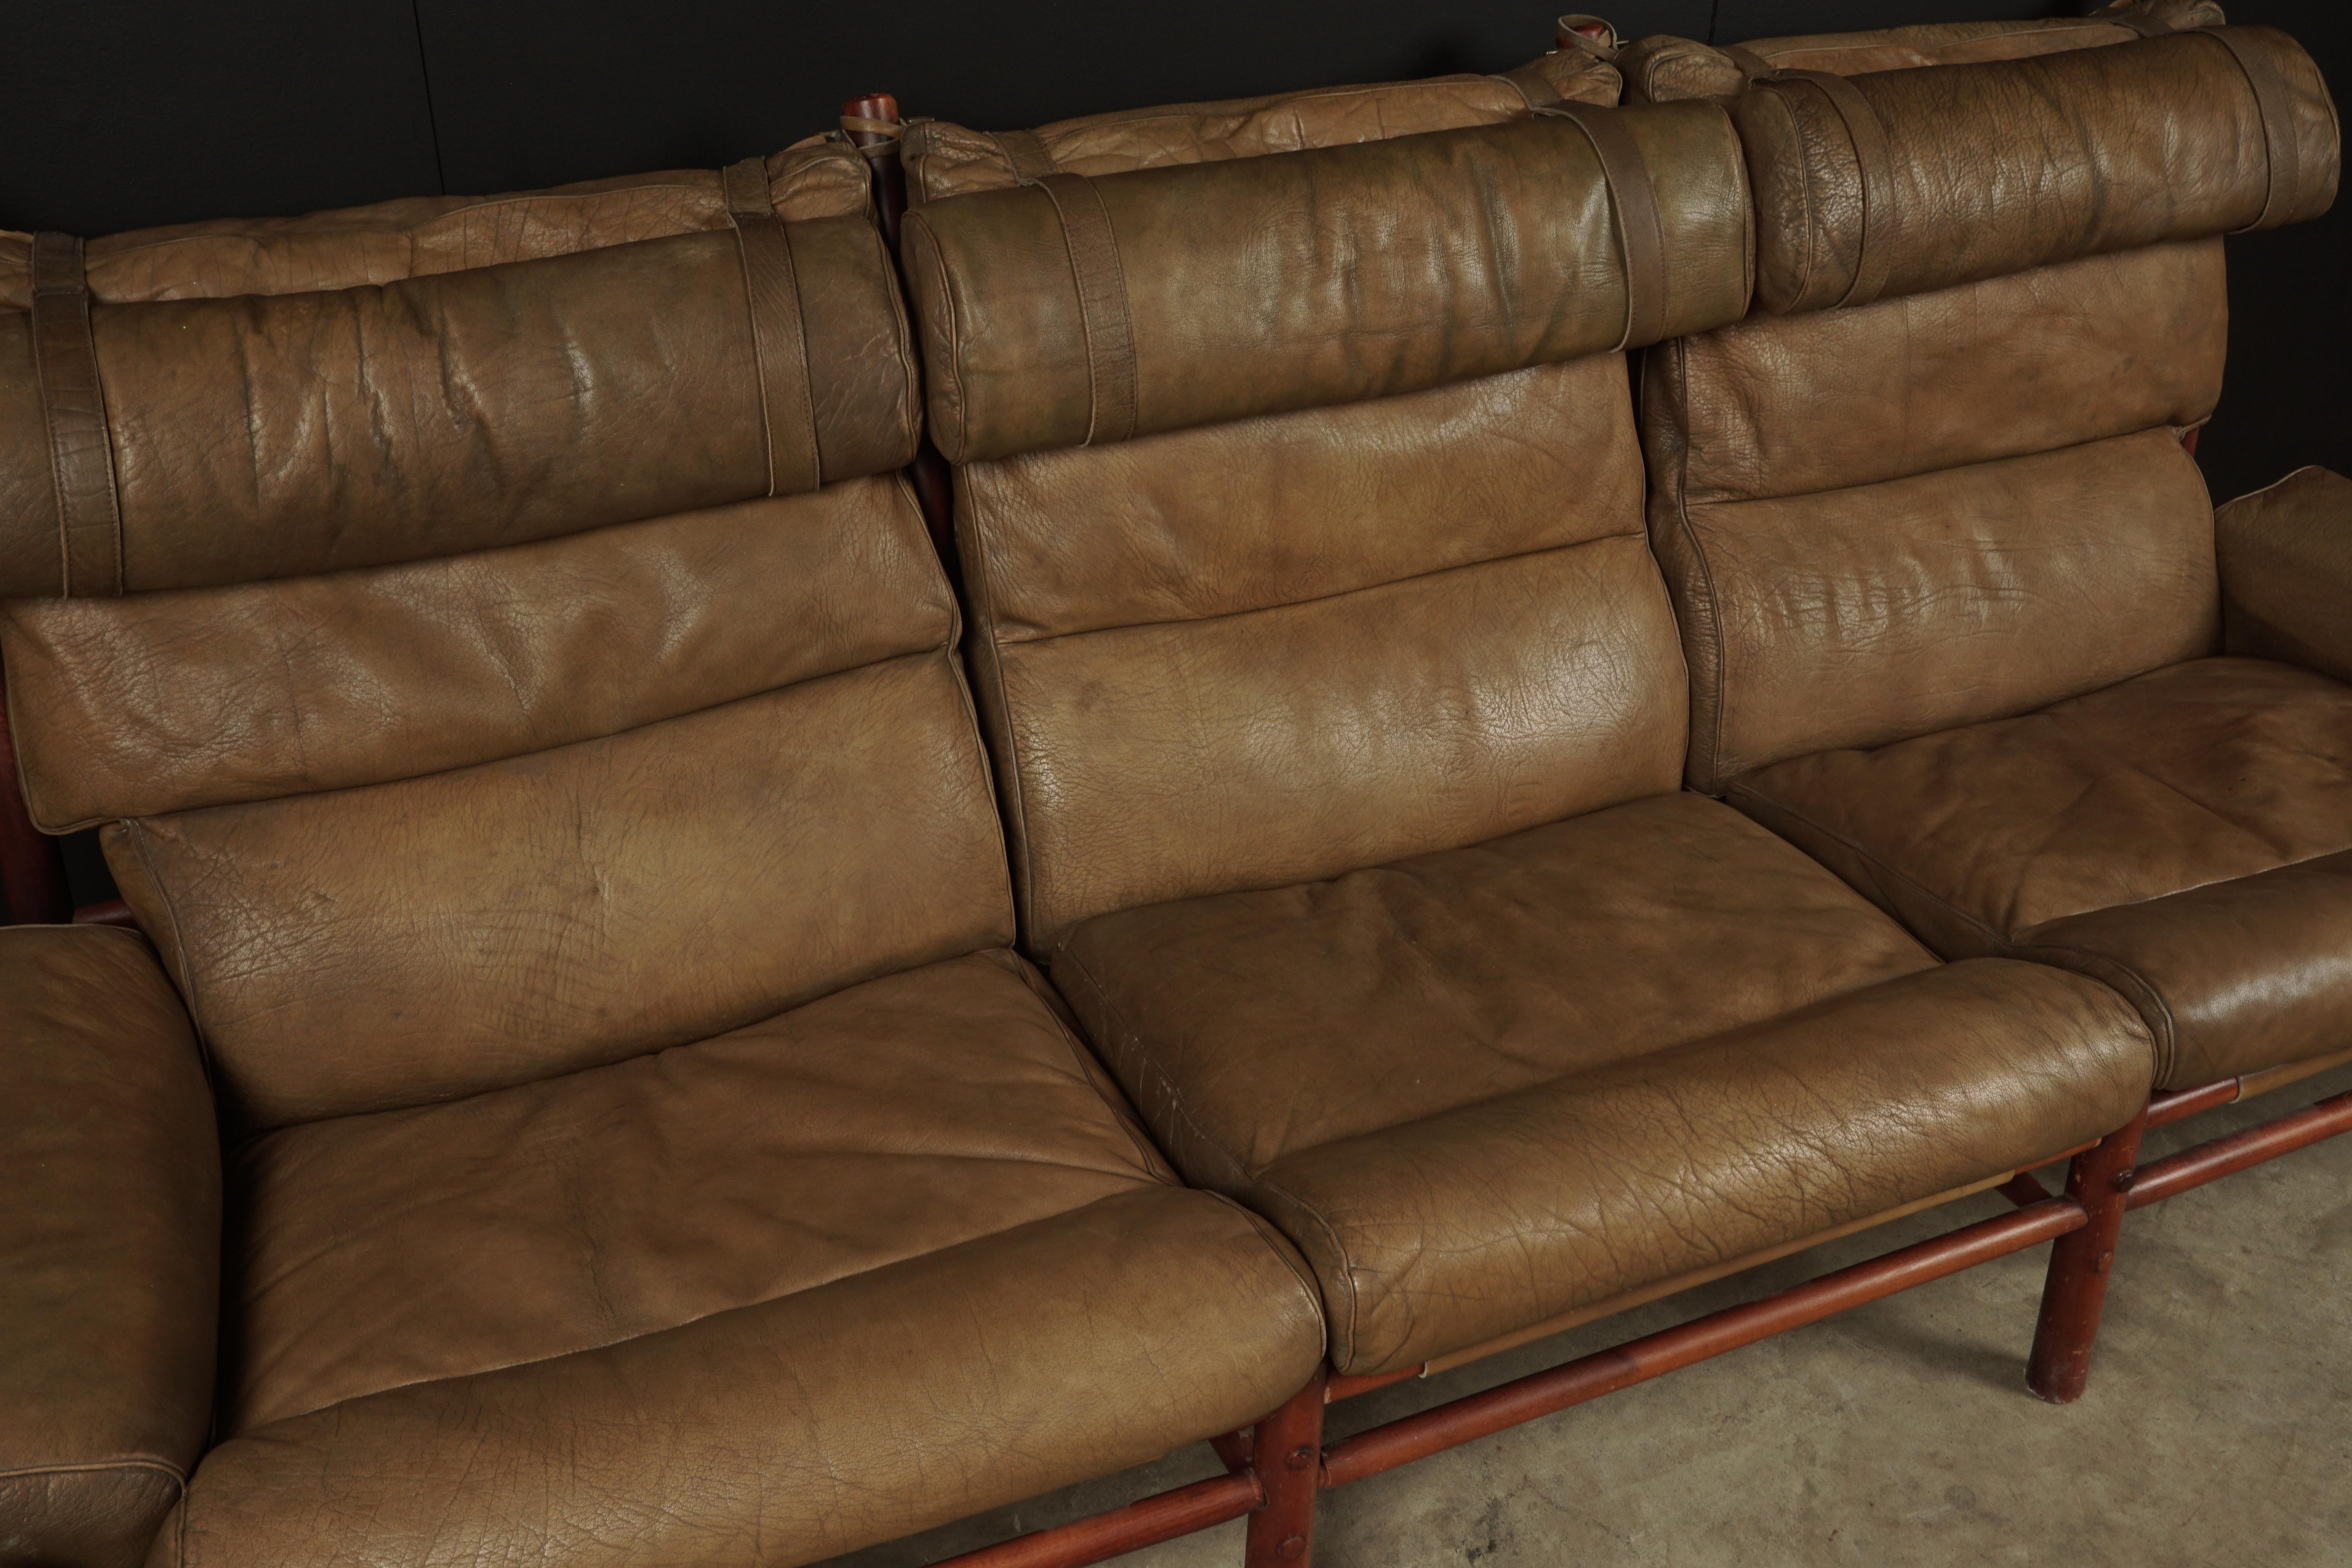 Midcentury sofa designed by Arne Norell, model Inca, circa 1970. Original thick brown leather with patina on a solid birch frame. Manufactured by Arne Norell AB, Aneby Sweden.